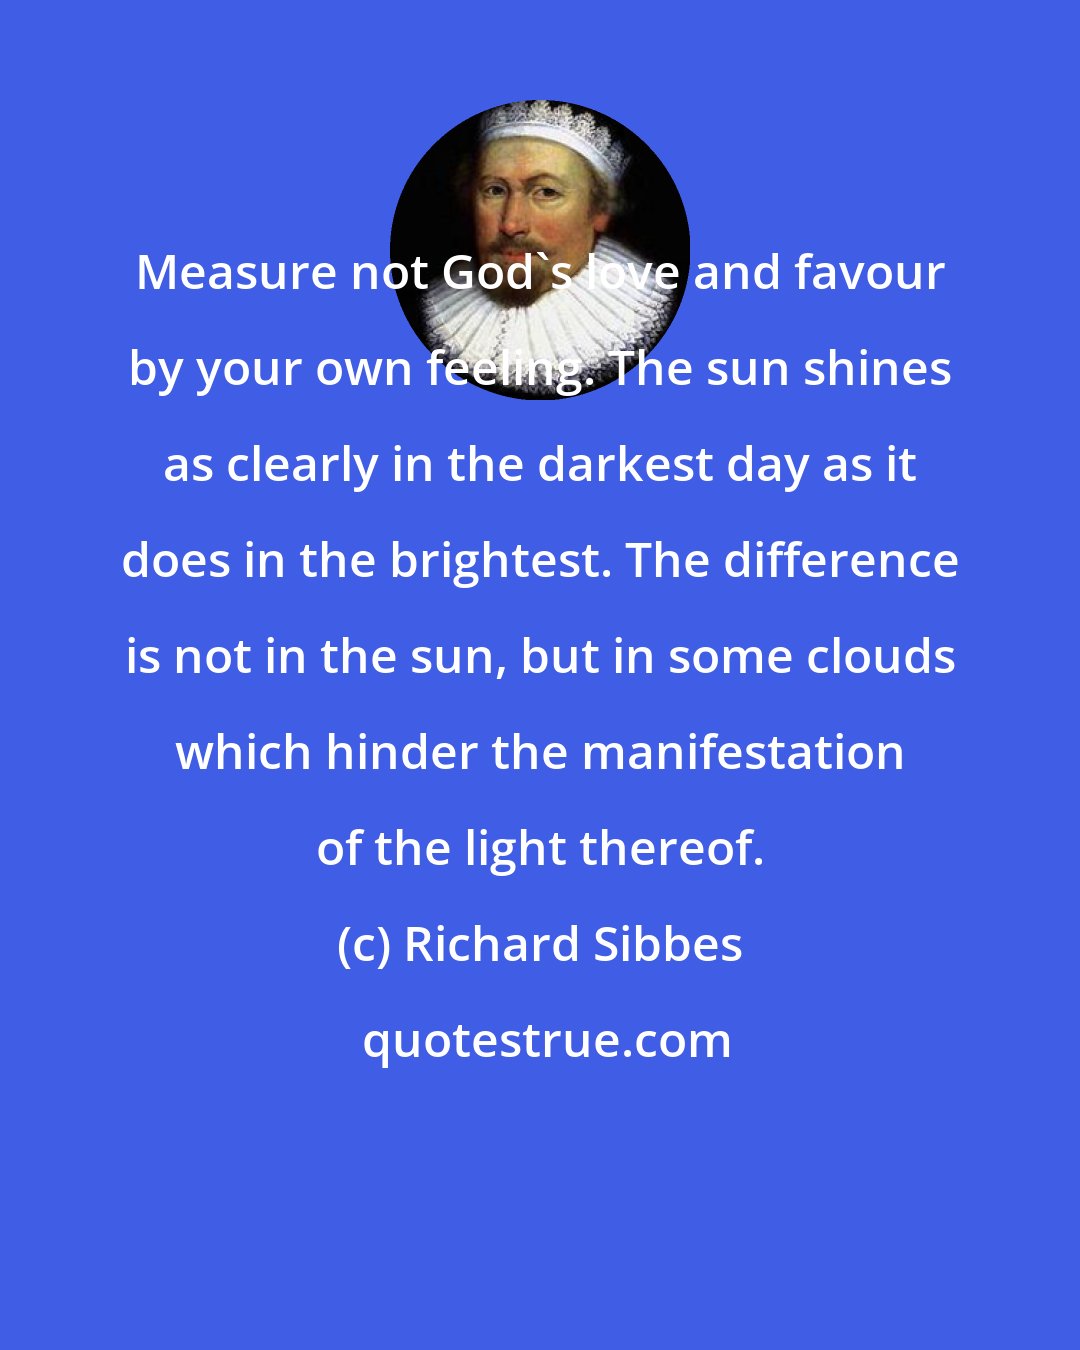 Richard Sibbes: Measure not God's love and favour by your own feeling. The sun shines as clearly in the darkest day as it does in the brightest. The difference is not in the sun, but in some clouds which hinder the manifestation of the light thereof.